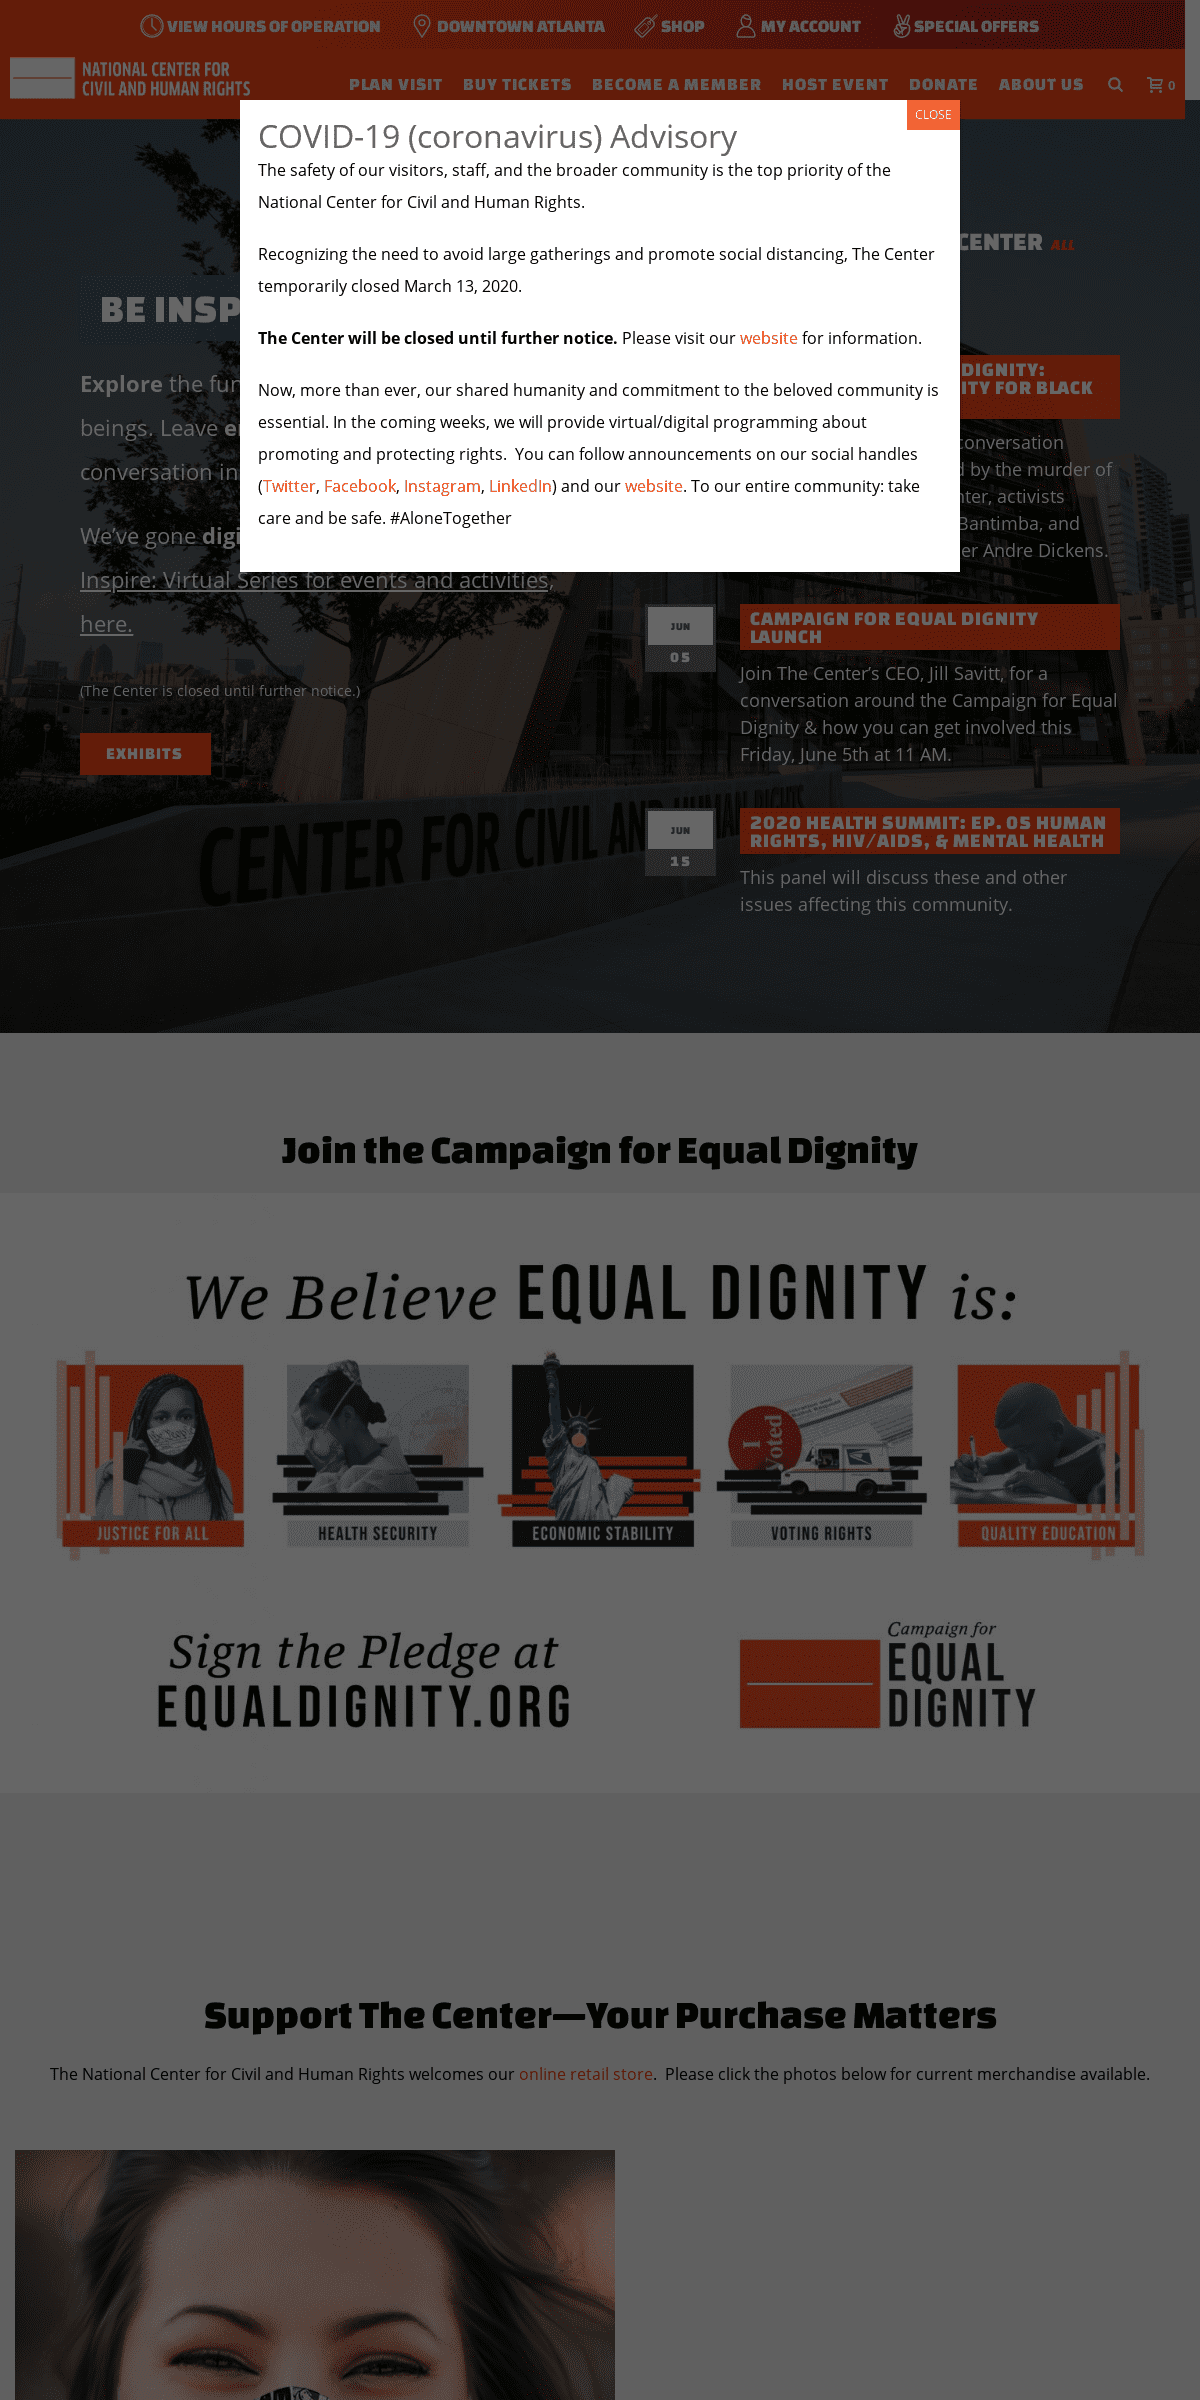 A complete backup of civilandhumanrights.org